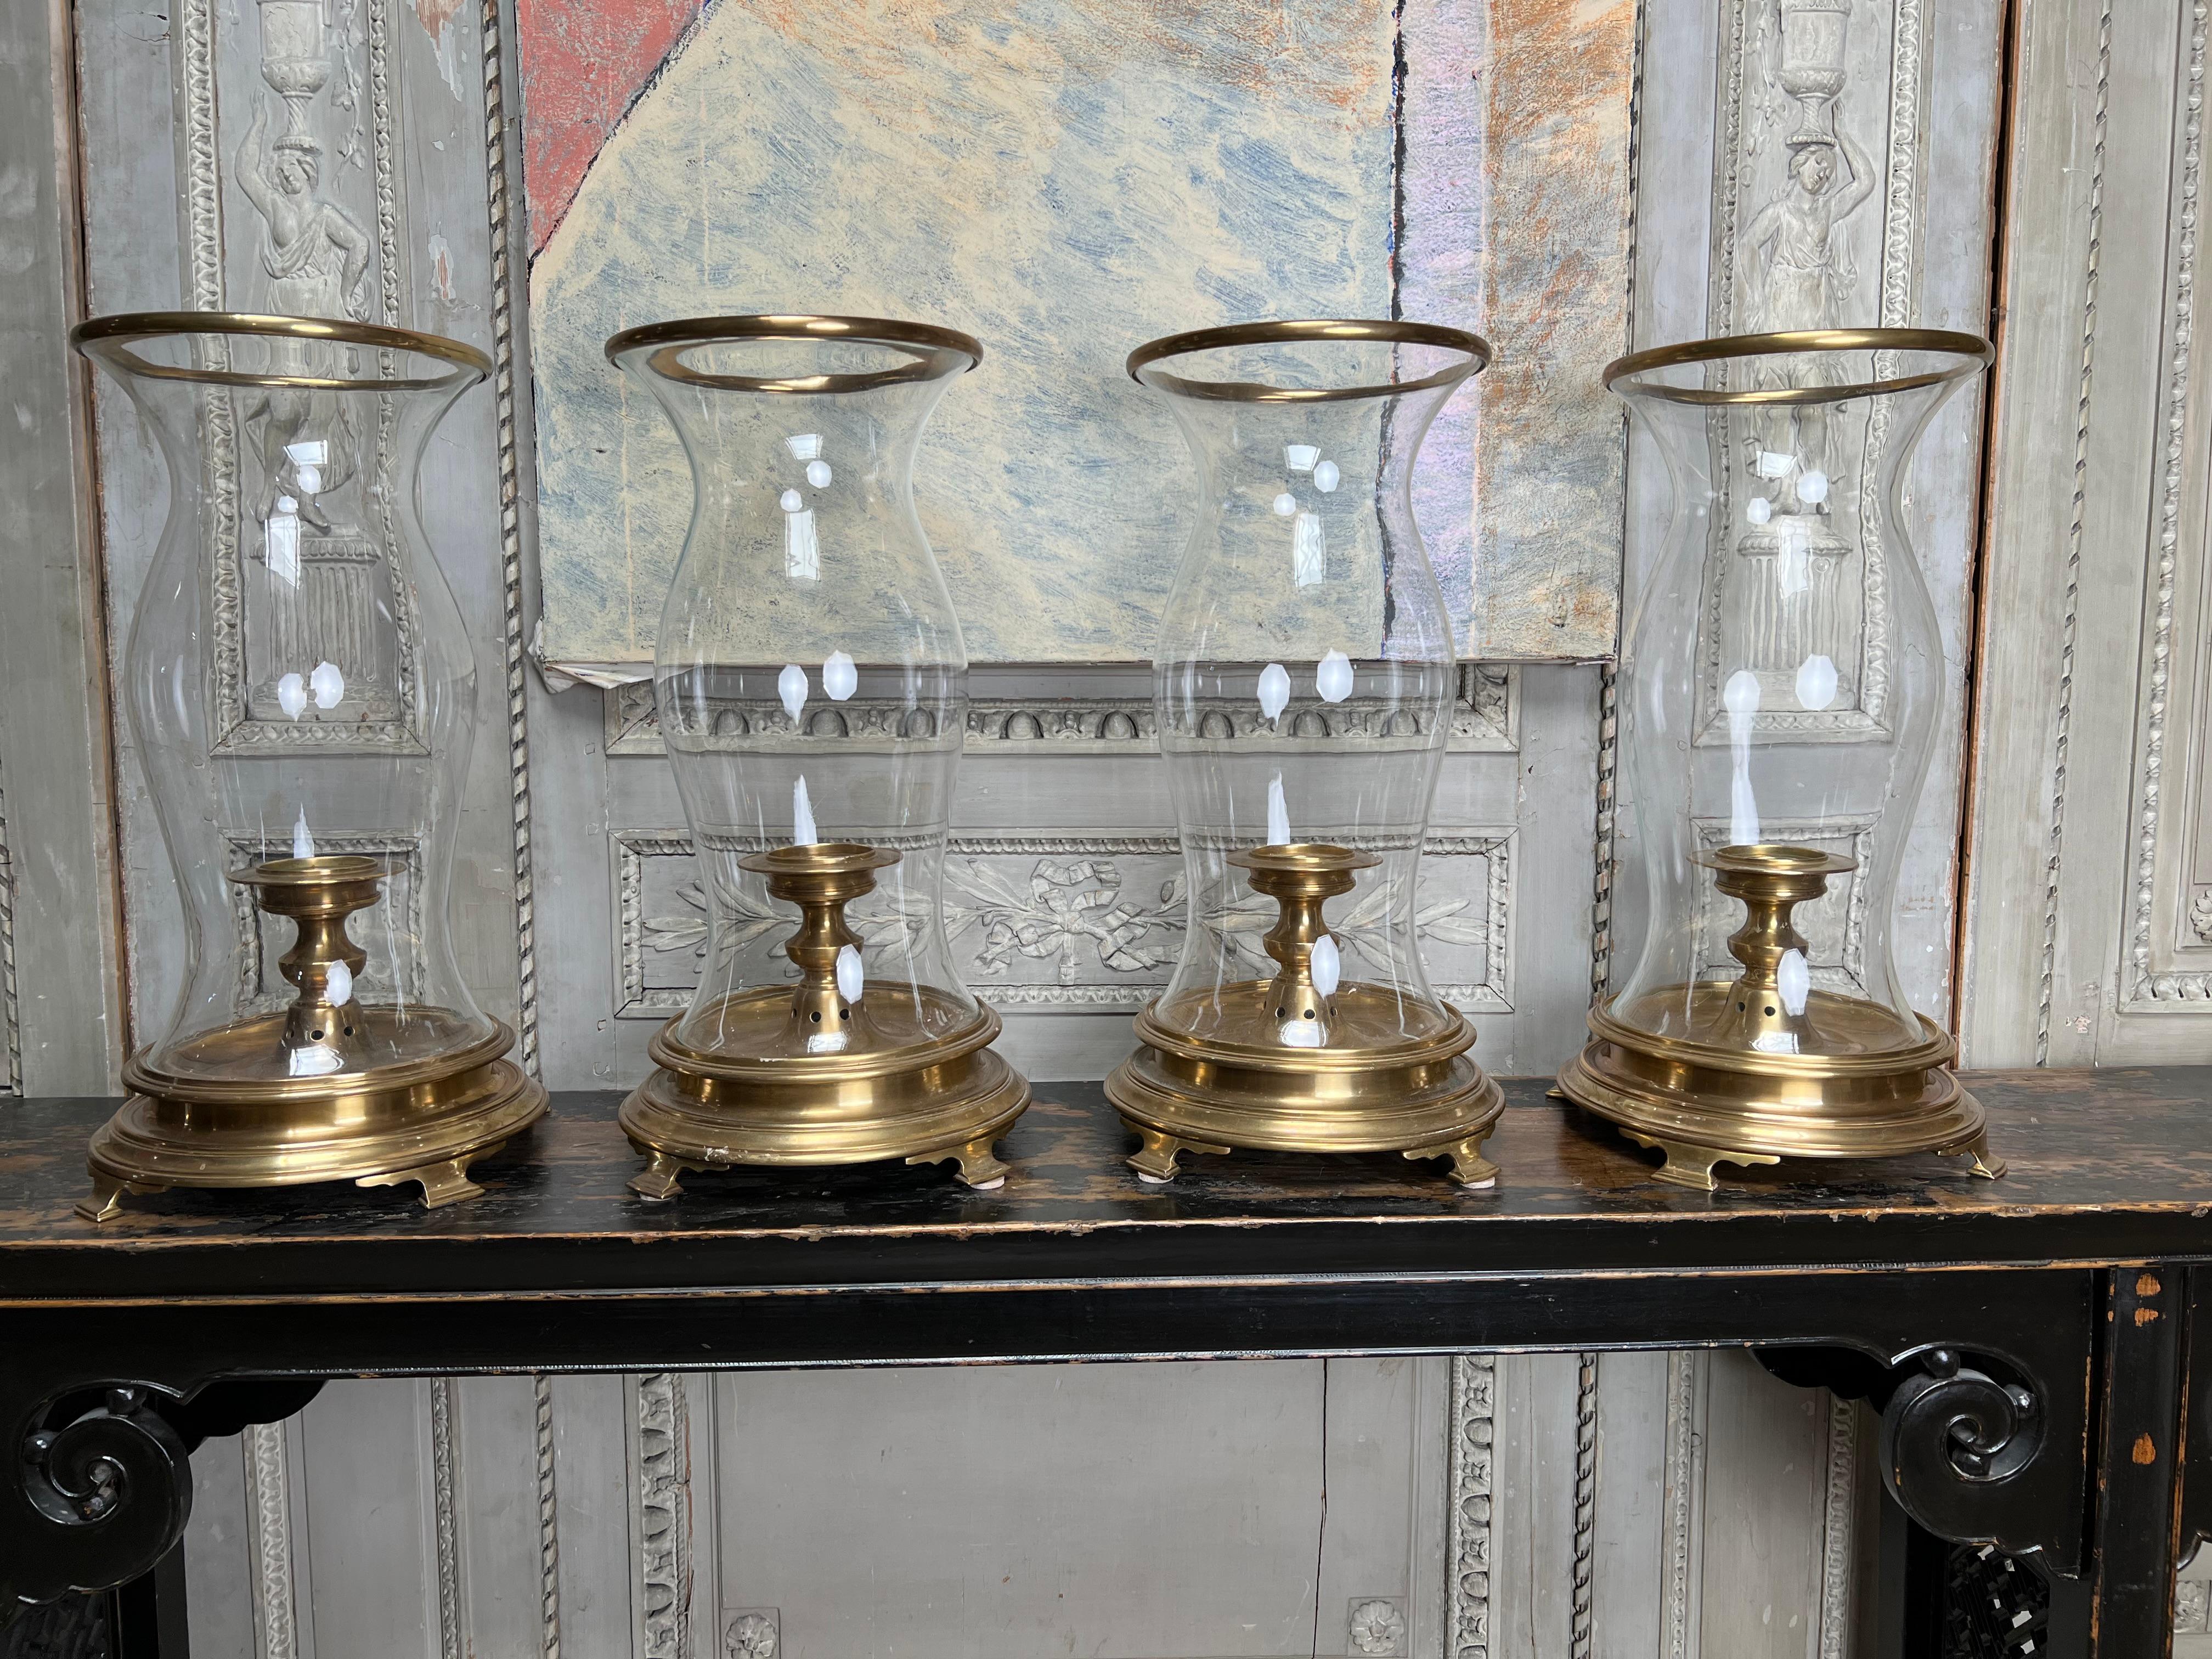 A set of four very large brass and glass hurricane candle holders from the 1970's by Chapman. 
They are in very good condition and have a brass trim around the top to help protect the glass.
 